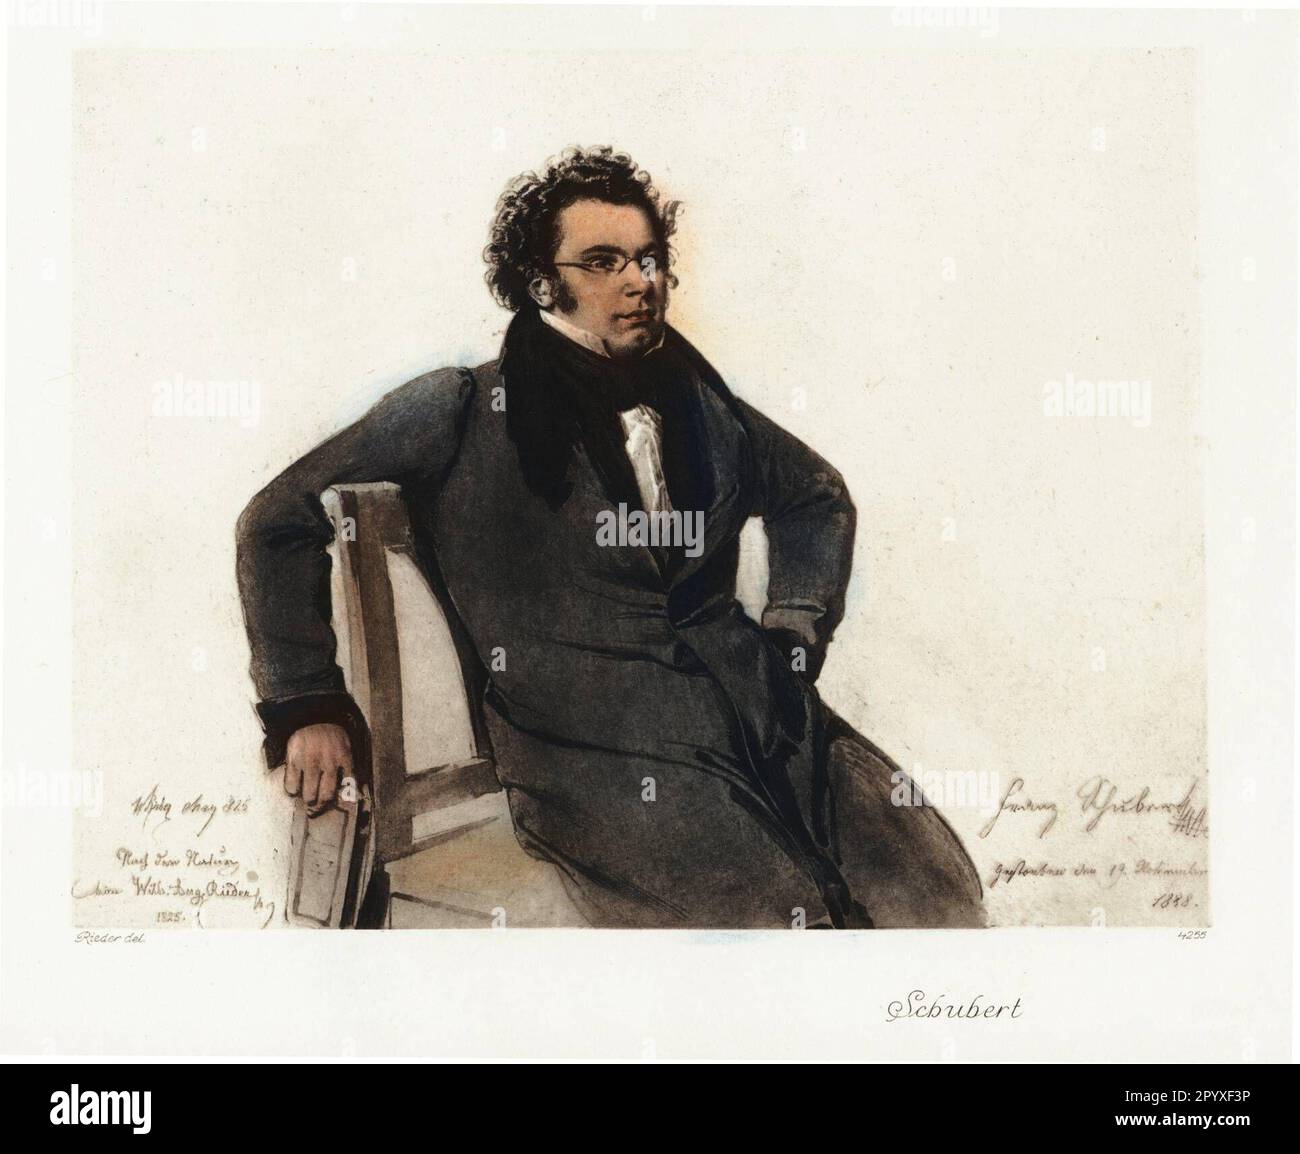 Franz Peter Schubert (1797-1828), Austrian composer. After an etching by Wilhelm August Rieder from 1825. Photo: Heliogravure, Corpus Imaginum, Hanfstaengl Collection. [automated translation] Stock Photo